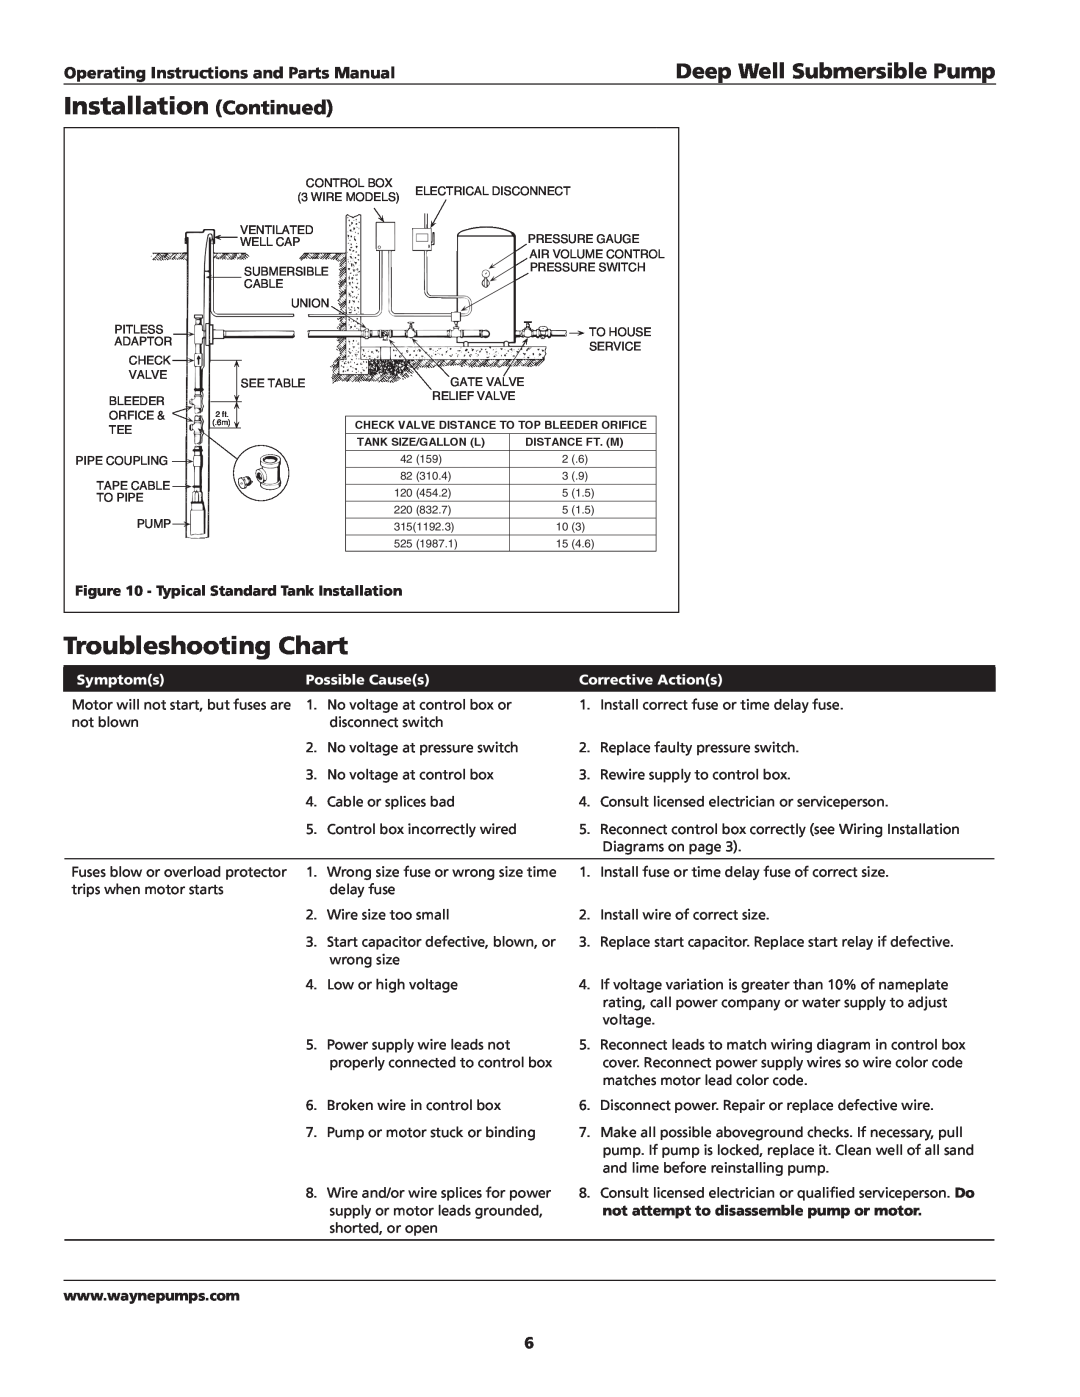 Wayne T75S10-2 Troubleshooting Chart, Installation Continued, Deep Well Submersible Pump, Symptoms, Possible Causes 